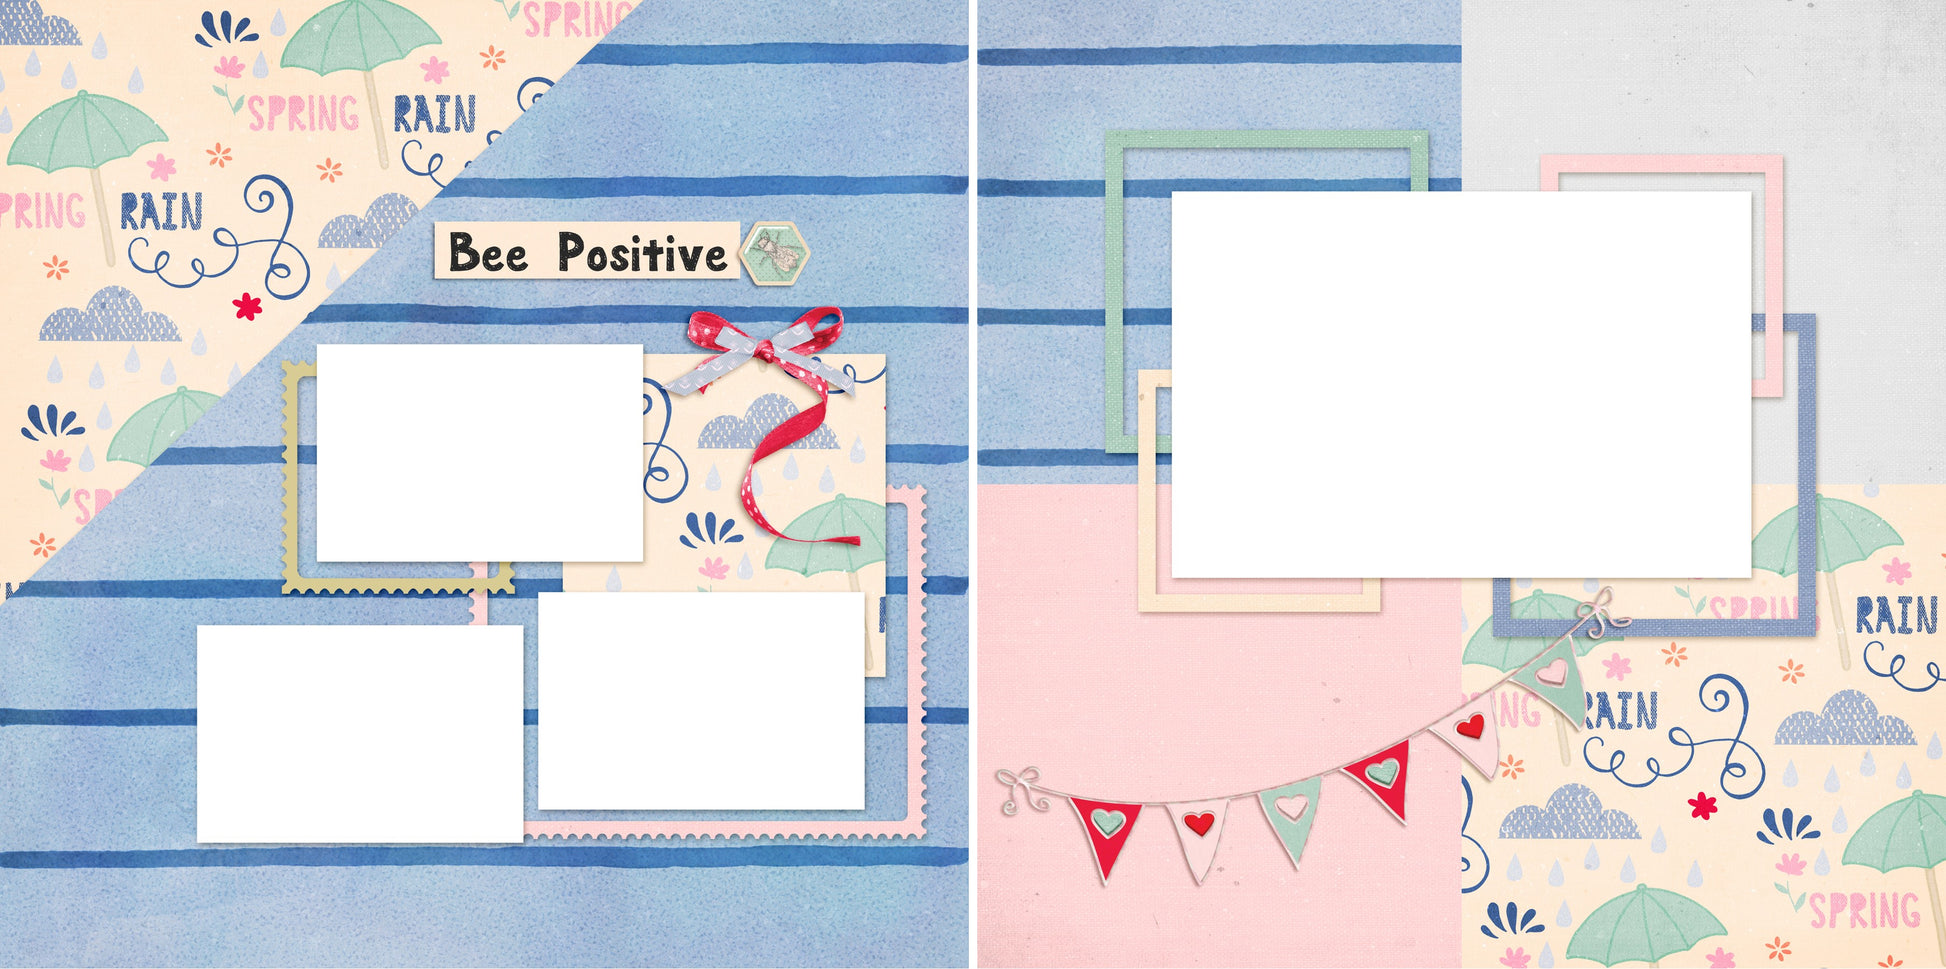 Bee Positive - Digital Scrapbook Pages - INSTANT DOWNLOAD - EZscrapbooks Scrapbook Layouts better days, positive thinking, quarantine, rainy day, spring